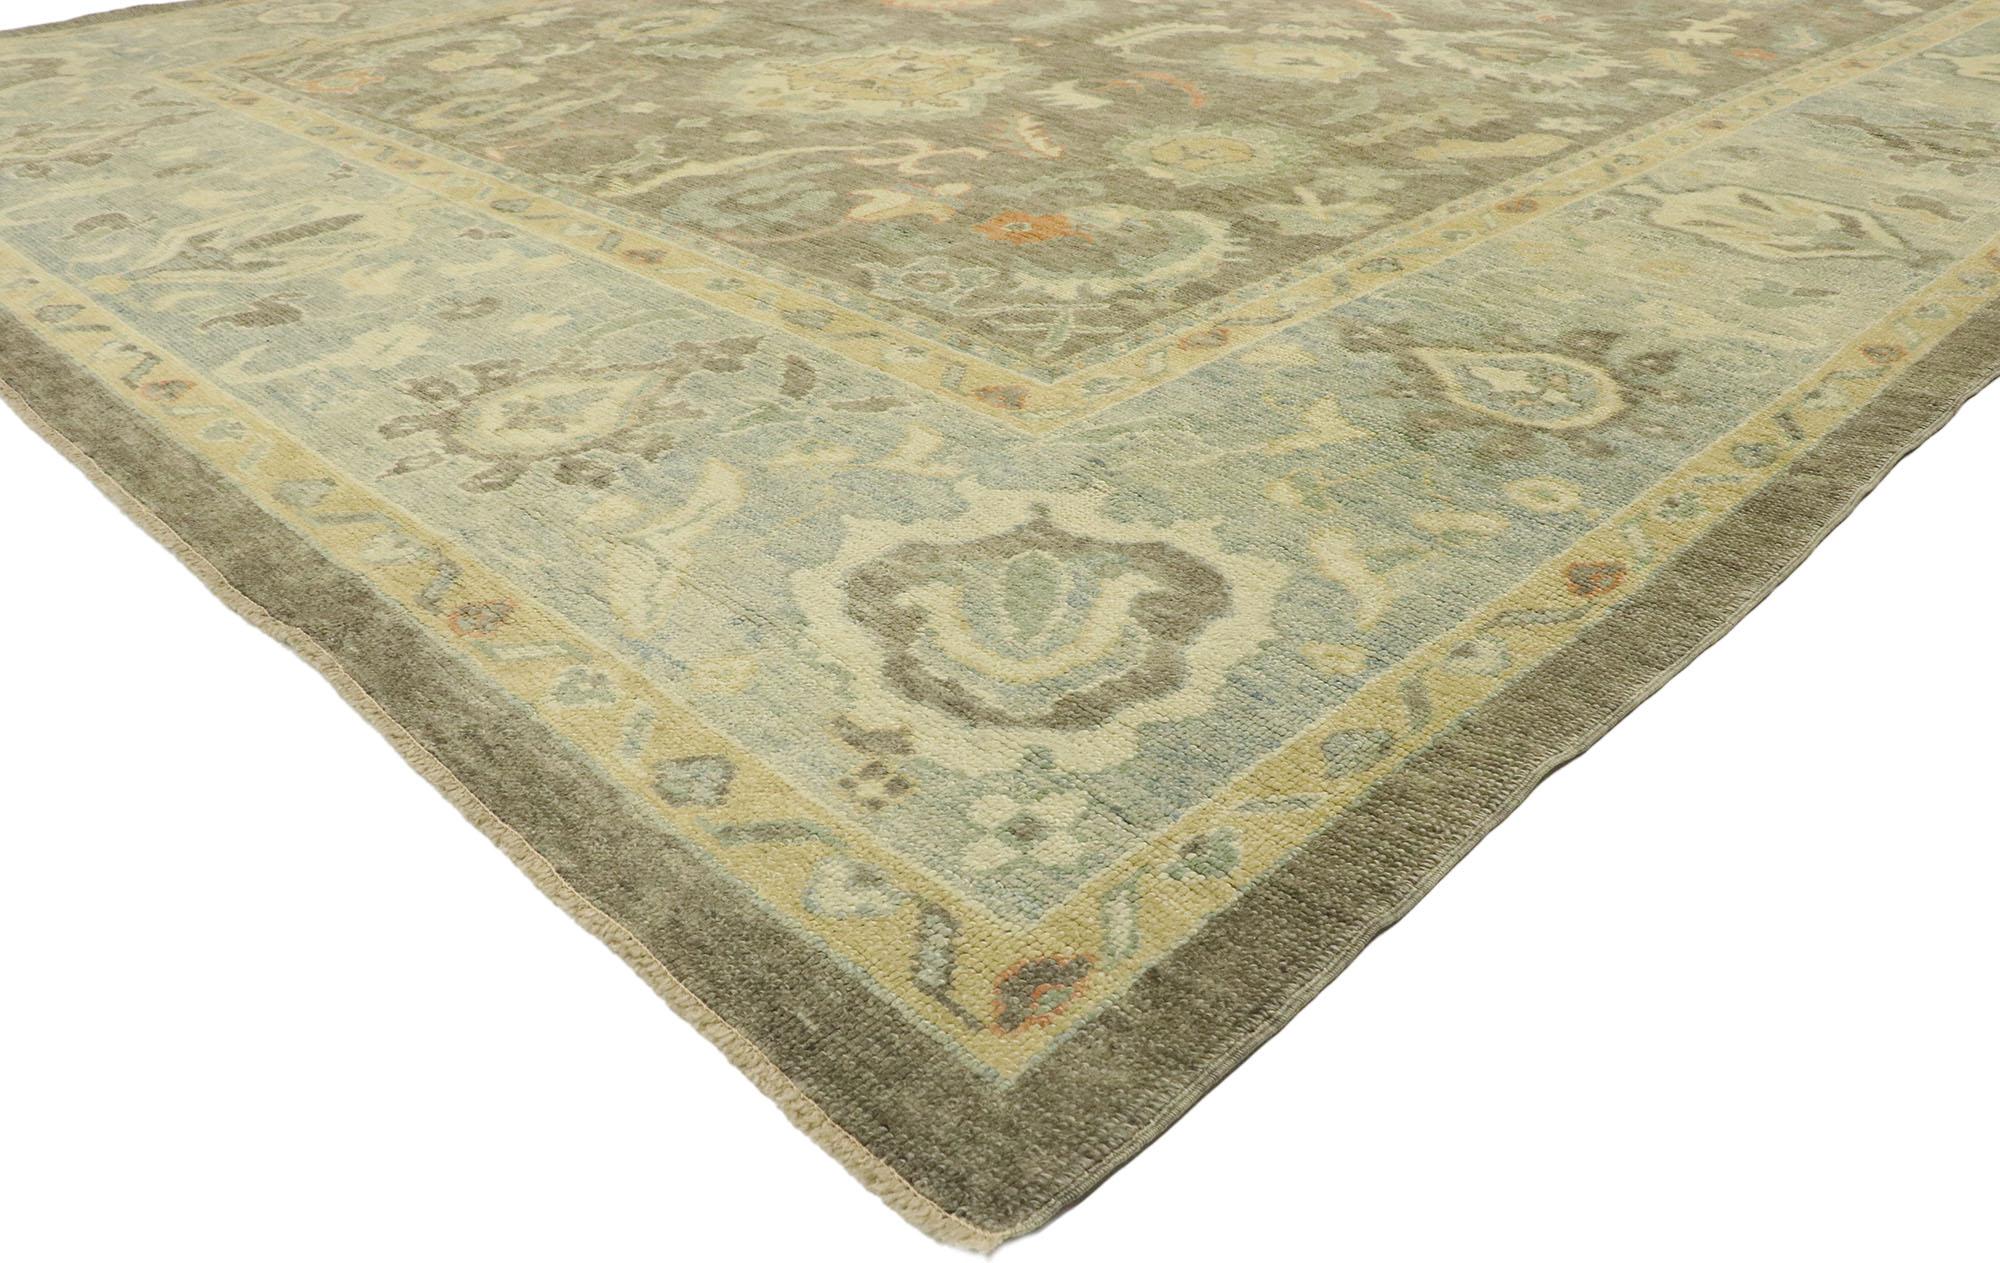 53157, new contemporary Turkish Oushak rug with Modern Transitional style 11'08 x 15'03 Blending elements from the modern world with earth-tone colors, this hand knotted wool contemporary Turkish Oushak rug will boost the coziness factor in nearly